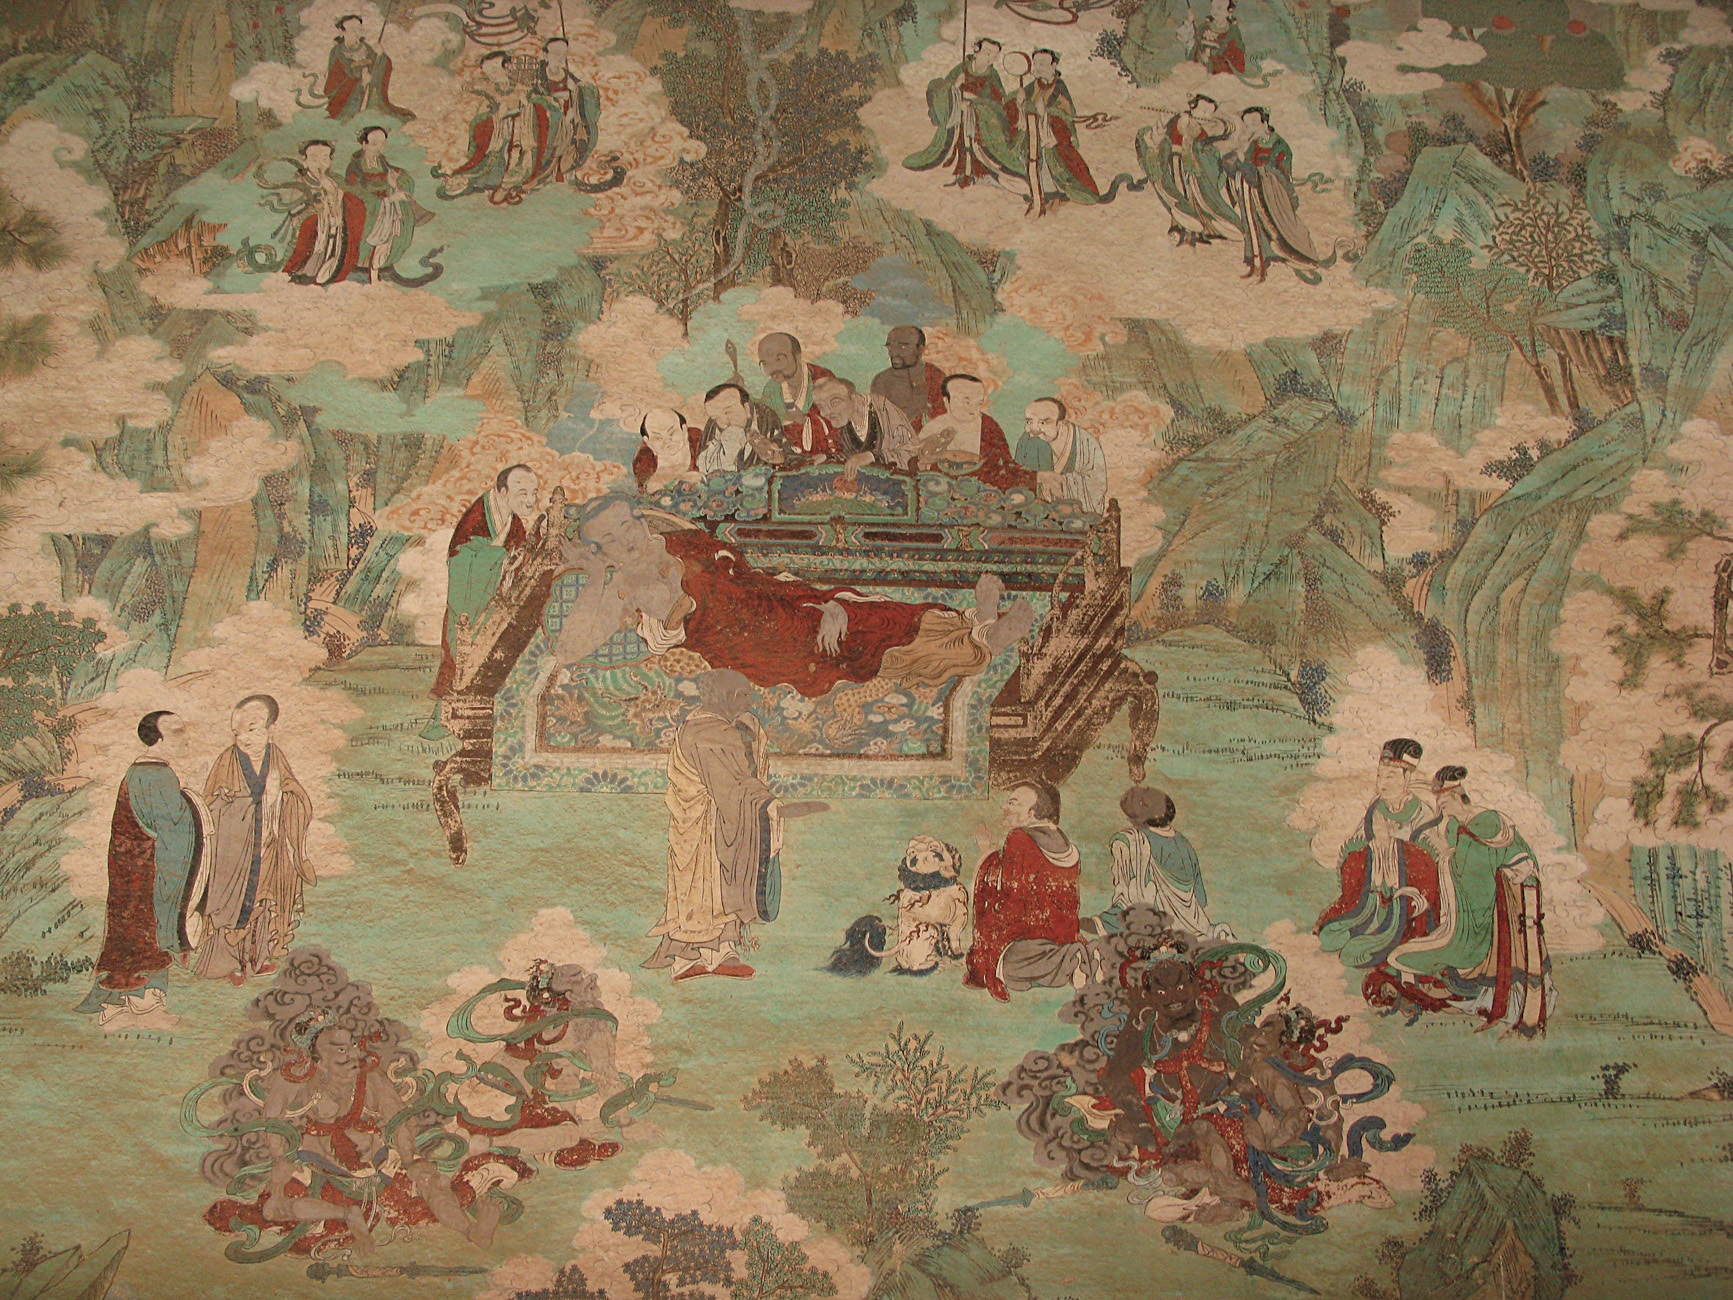 Figures crowd around bed supporting red-robed figure in center of landscape featuring duos conversing and floating on clouds